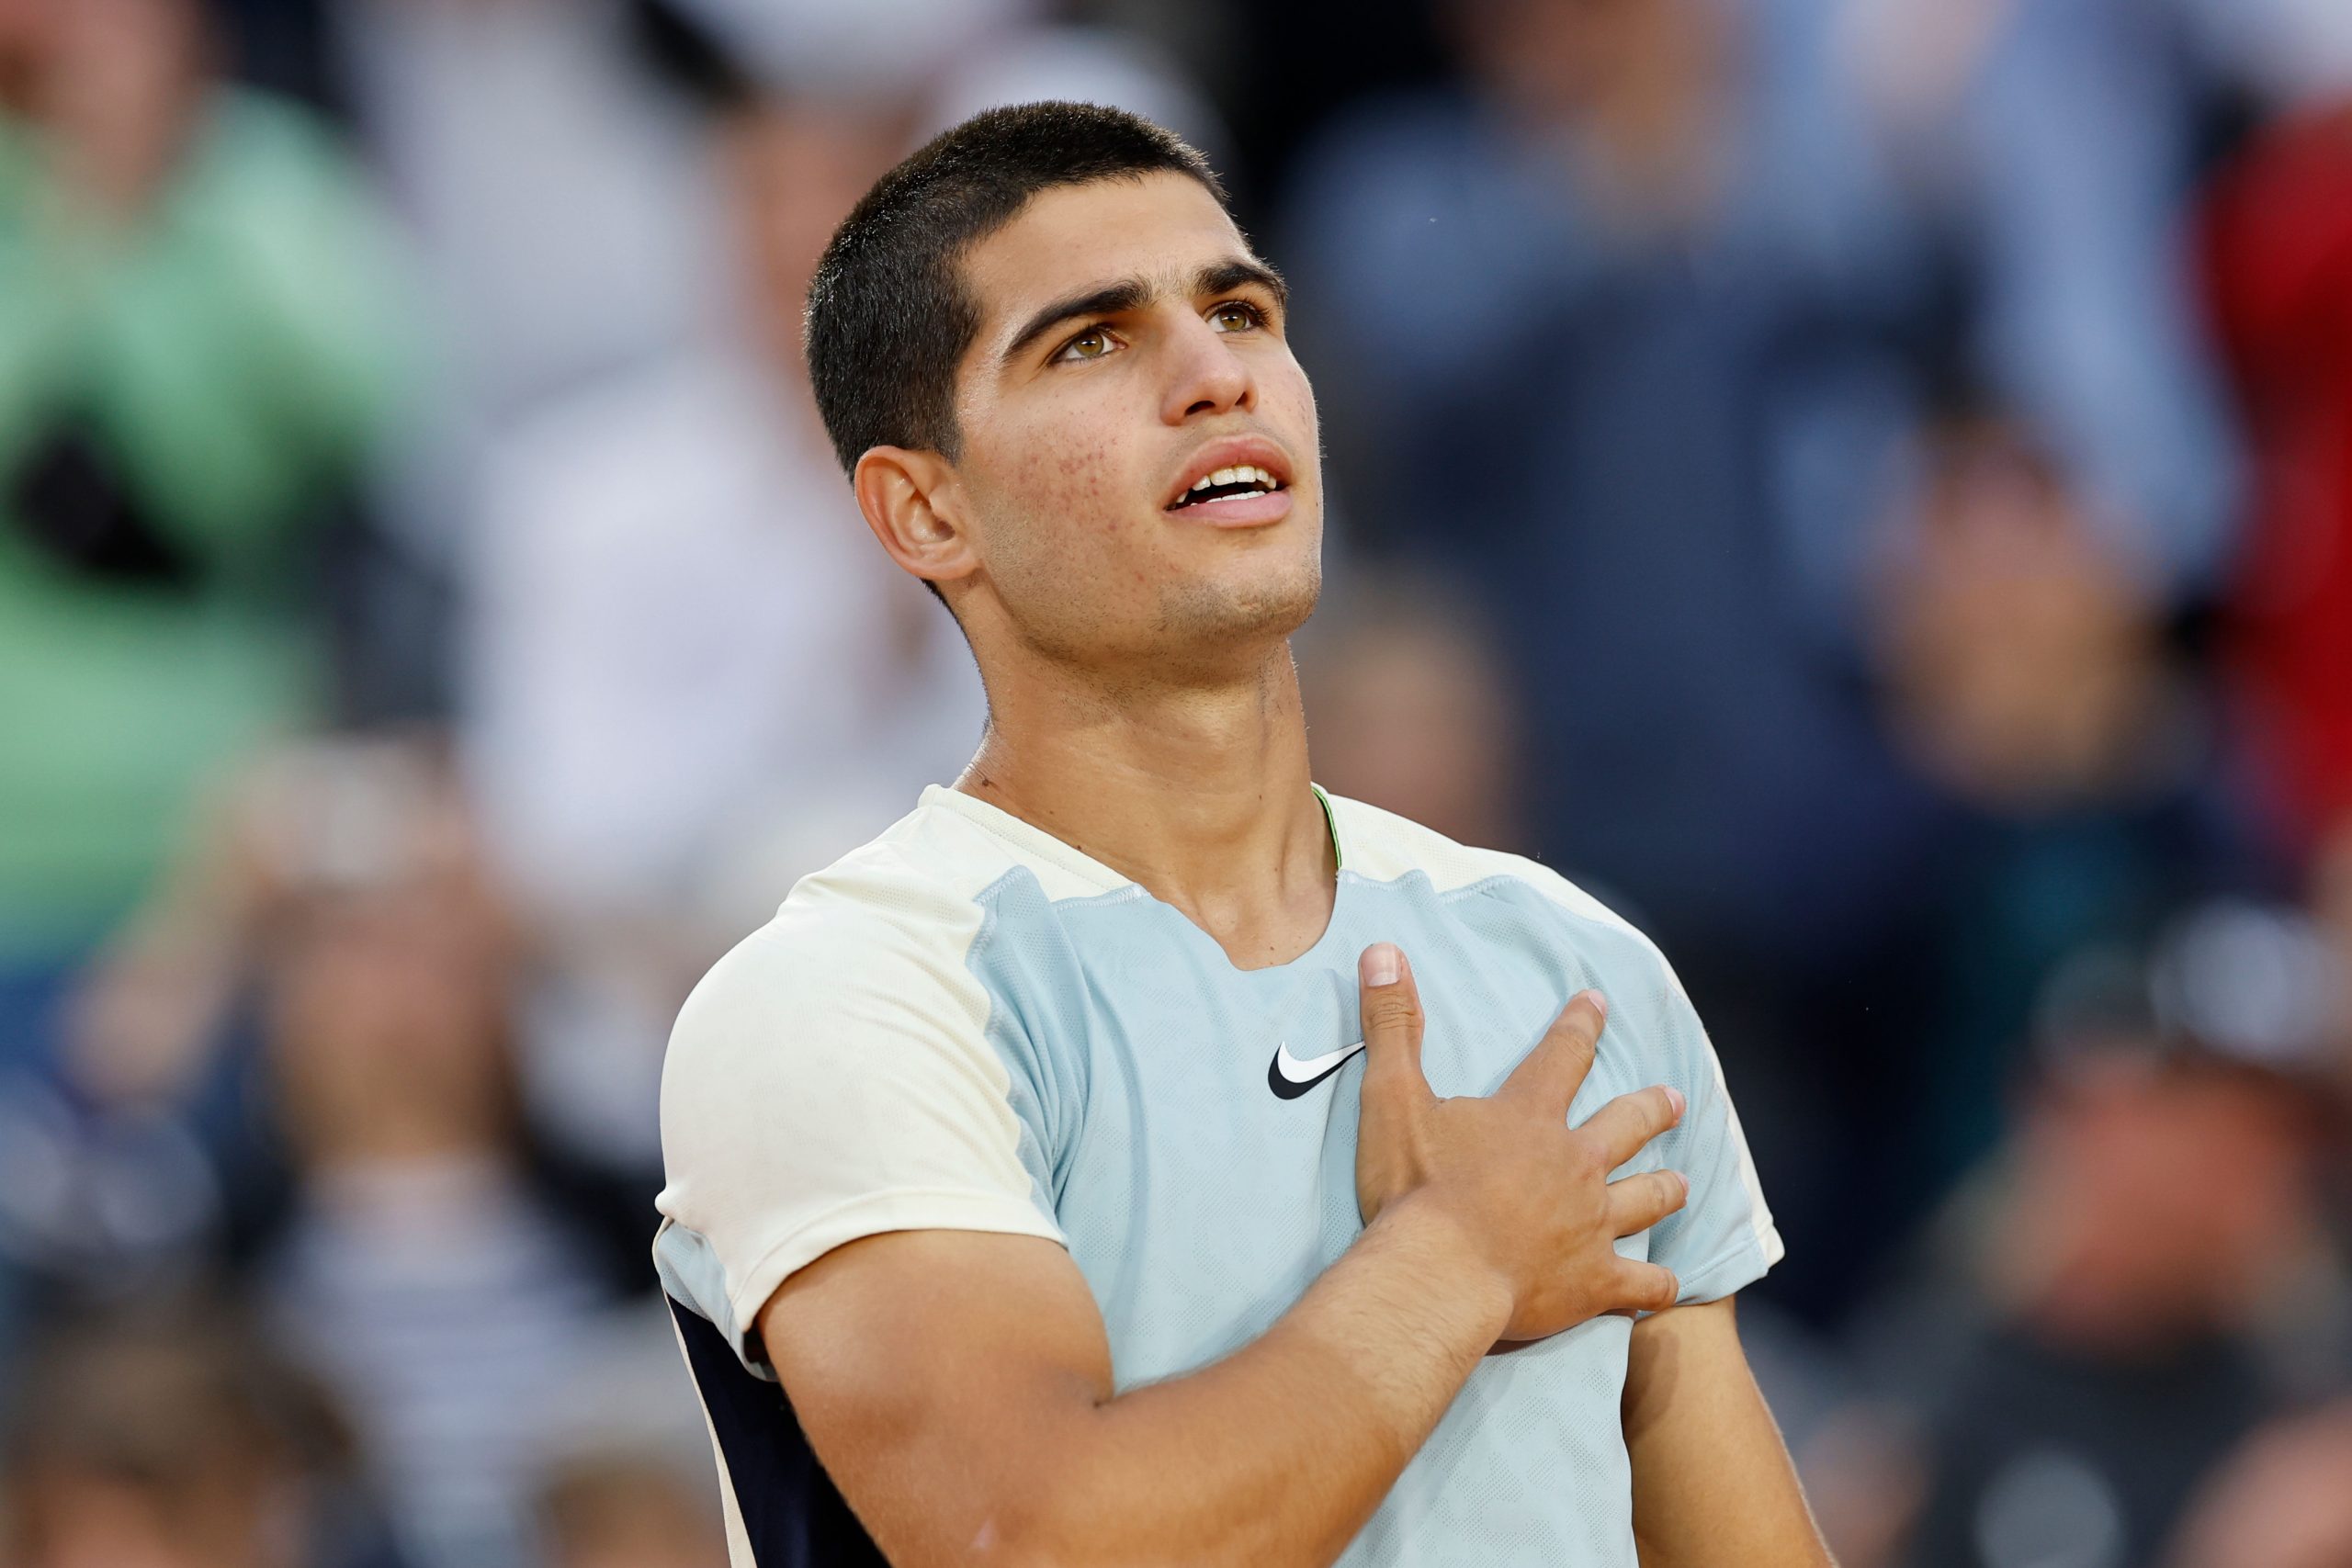 French Open 2022: Djokovic, Nadal, Alcaraz to be in action on Day 6